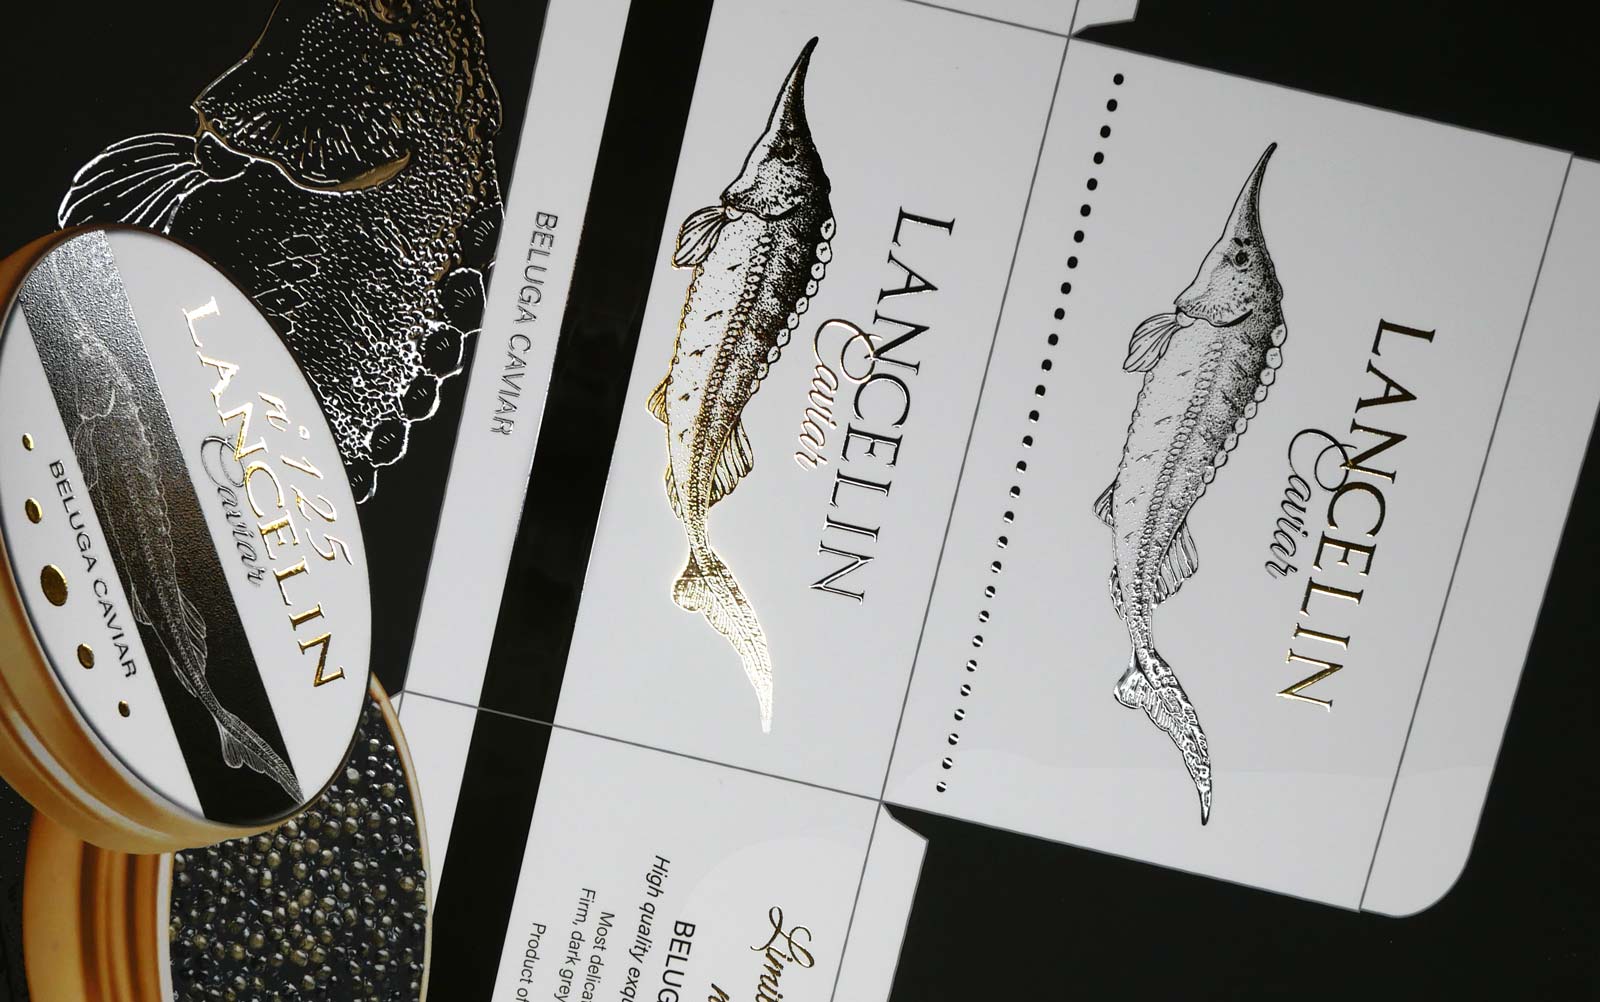 Caviar packaging printed and embellished with gilding and varnish on an MGI Digital Technology press.